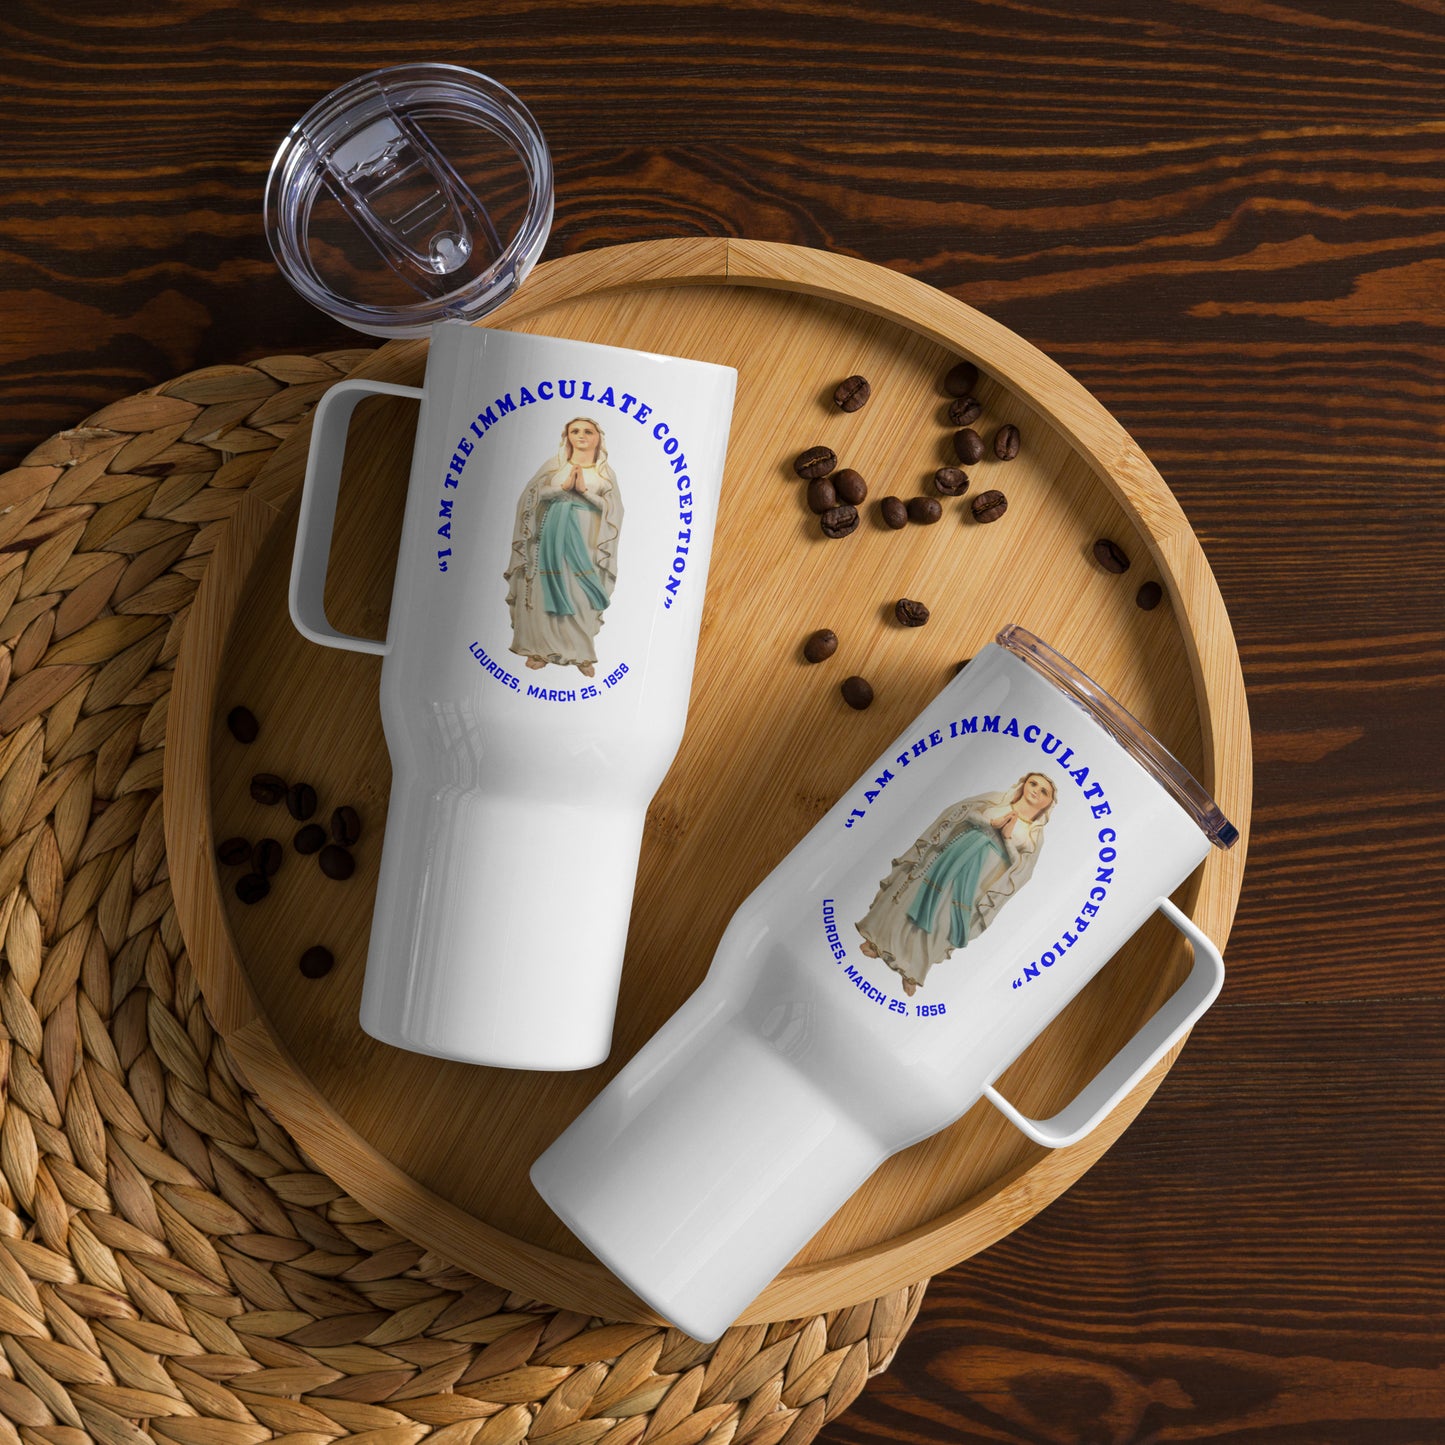 "I Am the Immaculate Conception" - Lourdes, France March 25, 1858 Travel mug with a handle